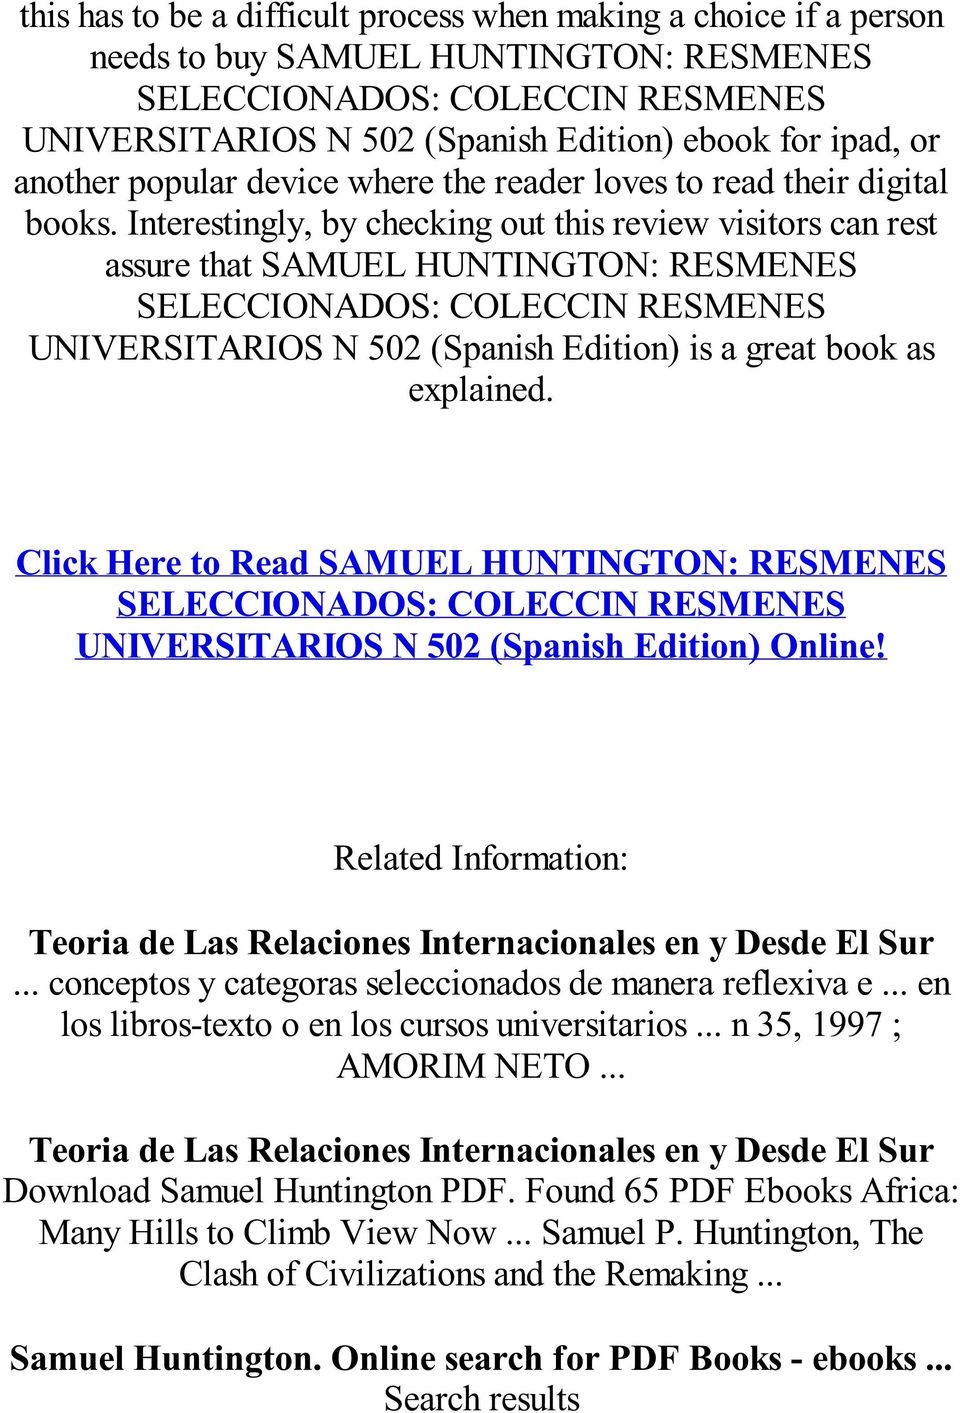 Interestingly, by checking out this review visitors can rest assure that SAMUEL HUNTINGTON: RESMENES UNIVERSITARIOS N 502 (Spanish Edition) is a great book as explained.